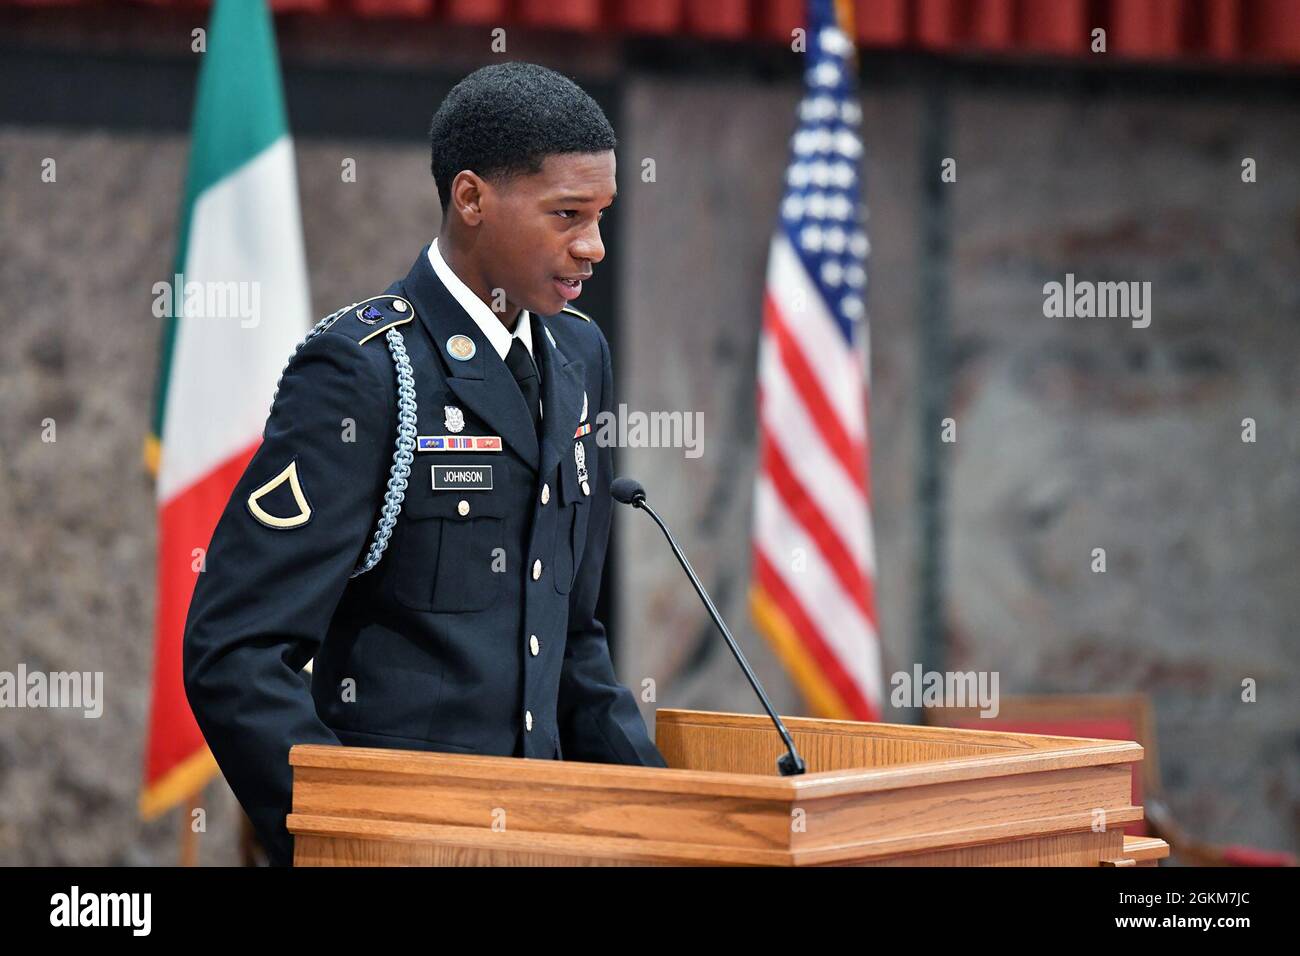 U.S. Army Paratrooper Pvt. Tywan Johnson assigned to the 1st Battalion, 503rd Infantry Regiment, 173rd Airborne Brigade addresses soldiers and friends during a memorial service for Pfc. Ian N. Morosoff, who died May 1 from injuries sustained in a car accident, Caserma Ederle, Vicenza, Italy, May 24, 2021. Stock Photo